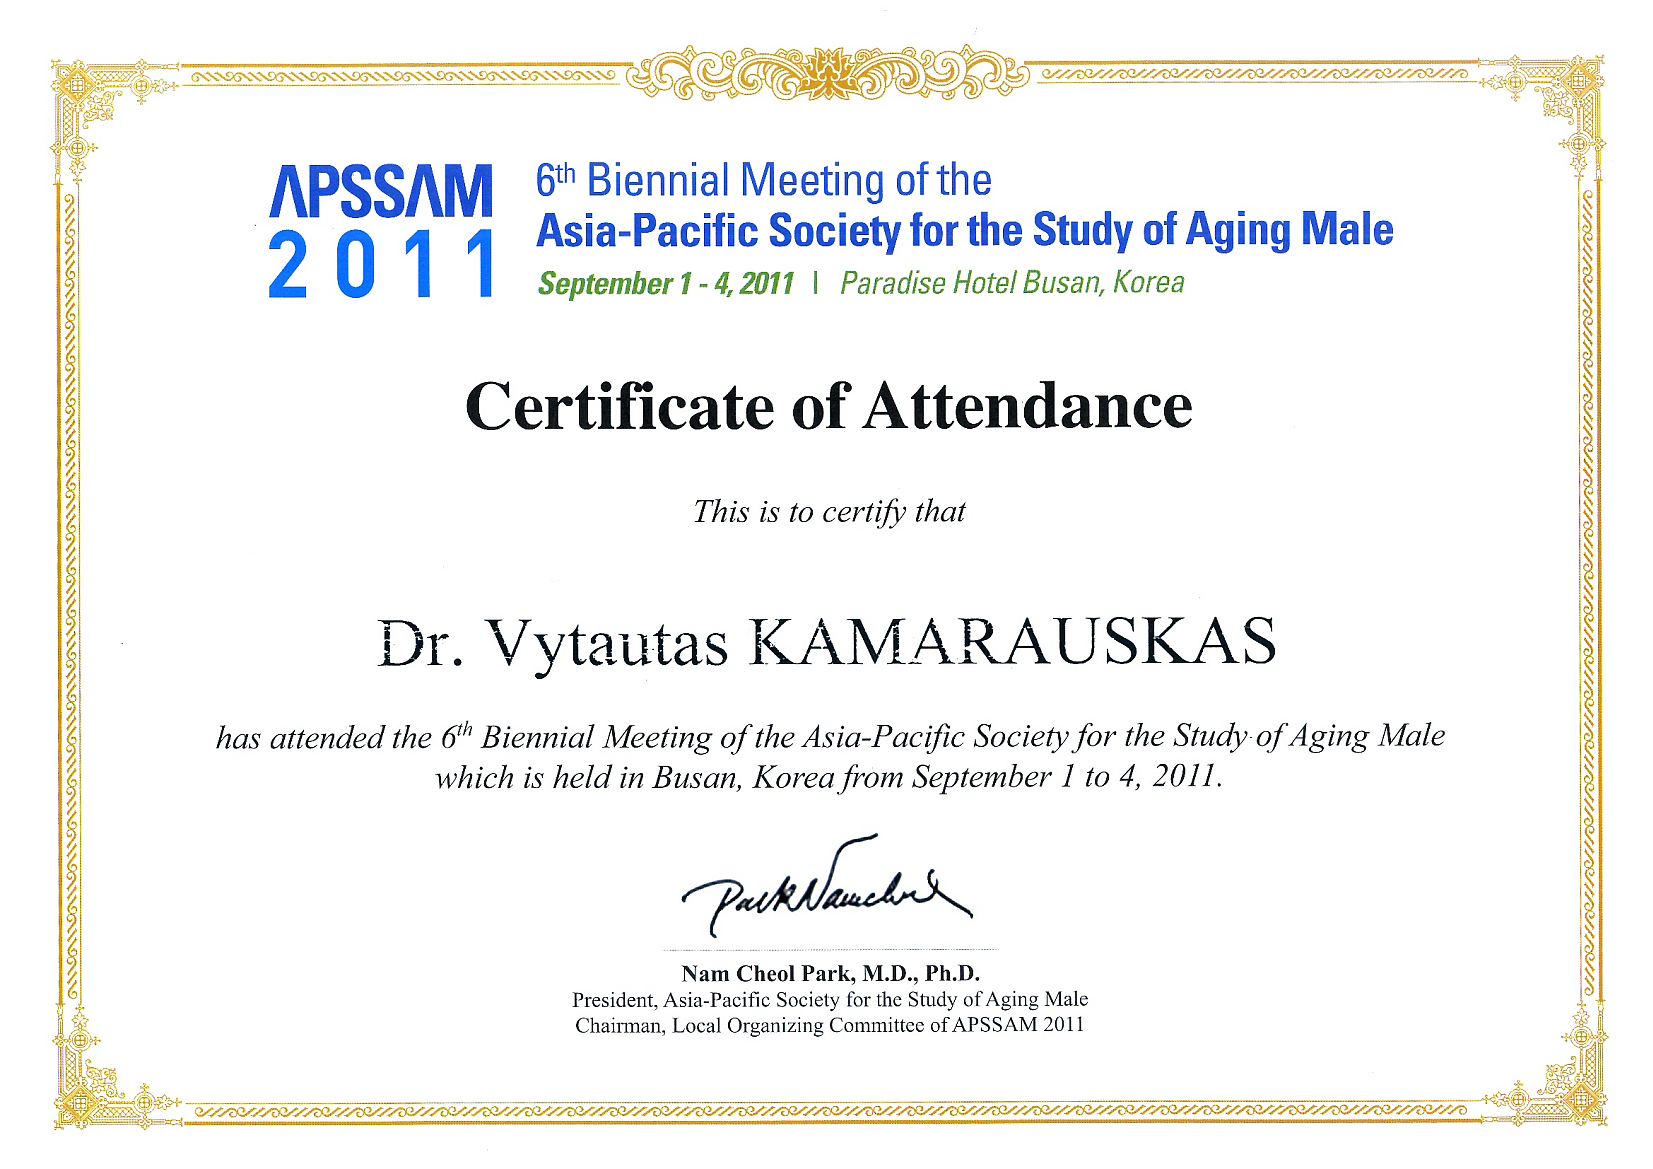 6th Biennial Meeting of the Asia-Pacific Society for the Study of Aging Male in Busan, 1-4 September 2011